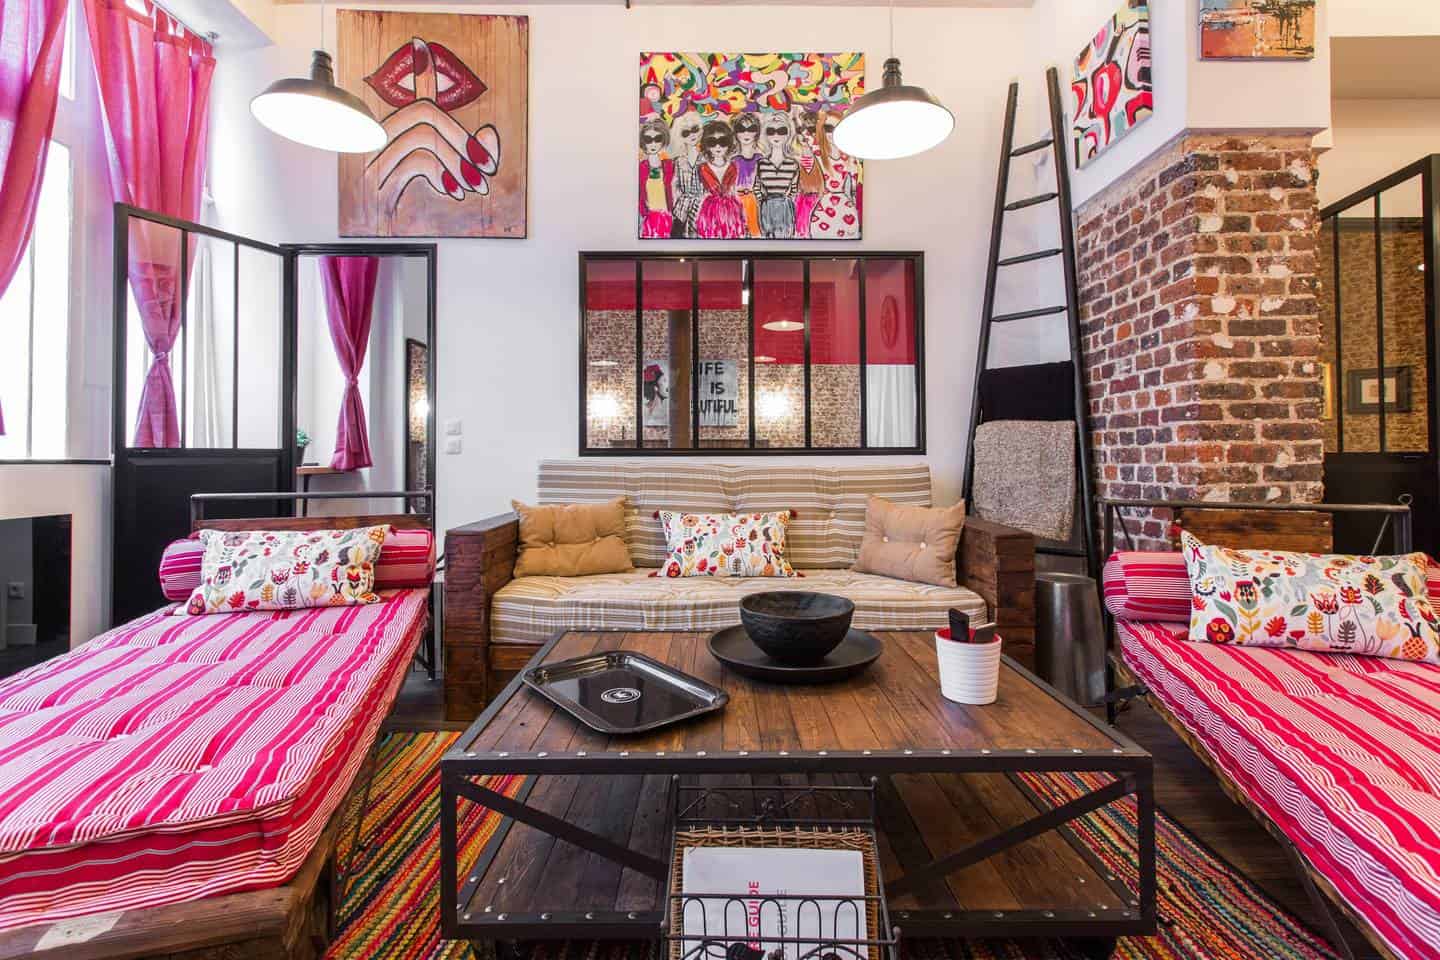 Wow! This Airbnb Paris listing near Montmartre is dreamy. You have to see the pictures!